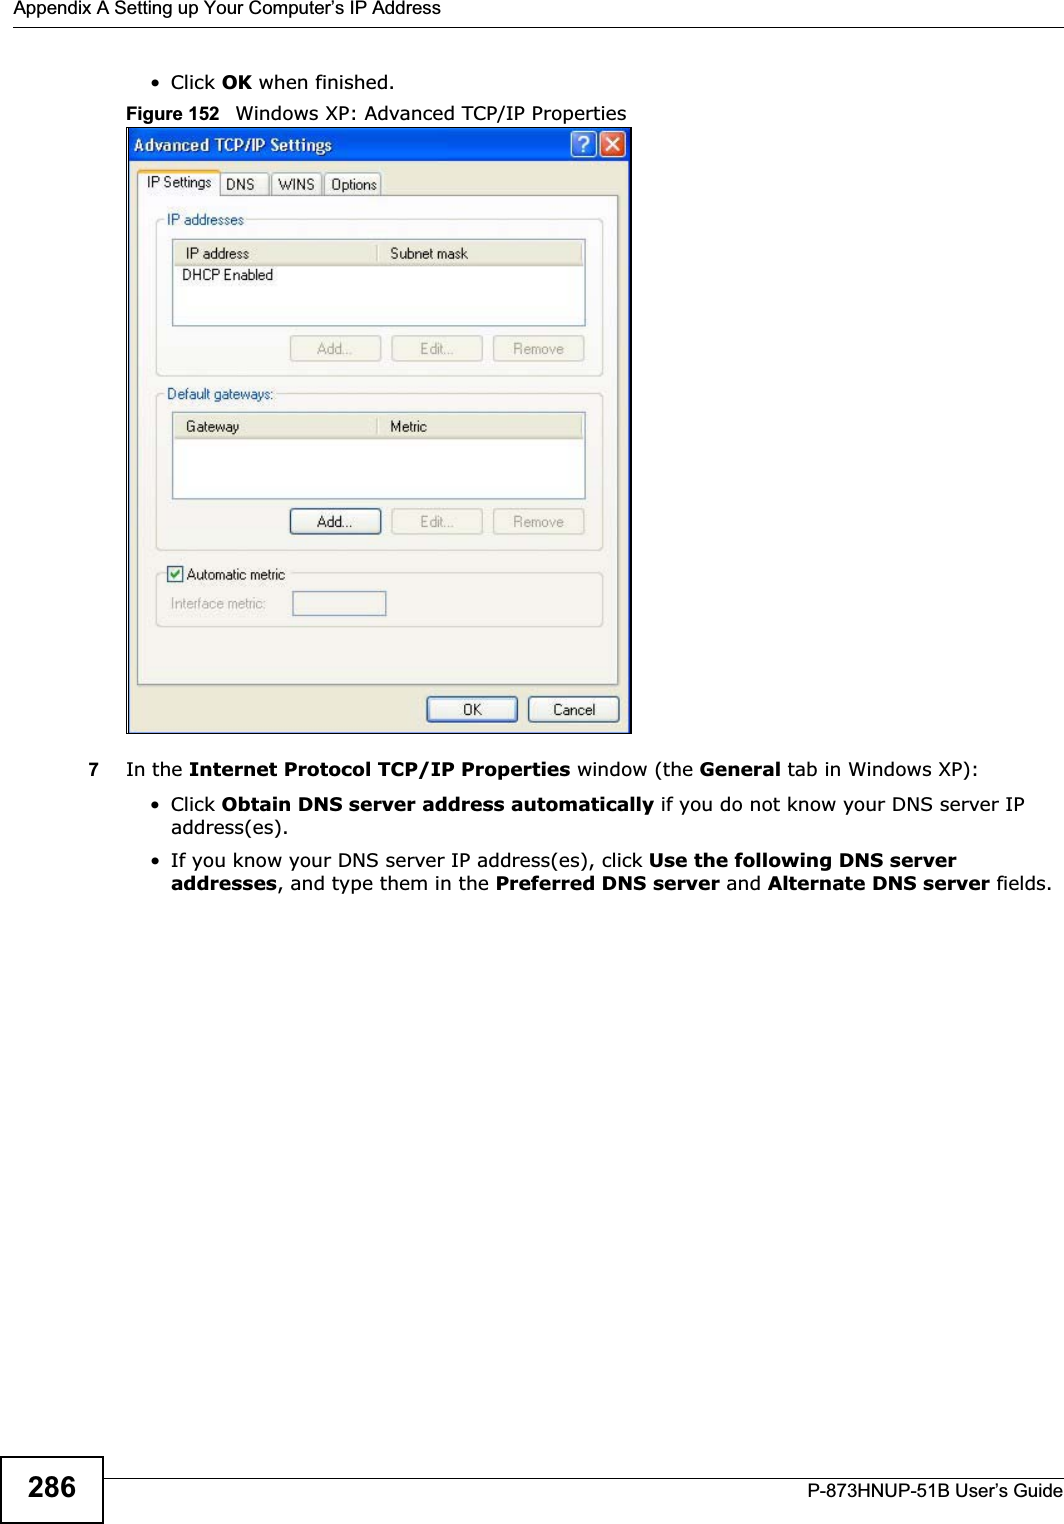 Appendix A Setting up Your Computer’s IP AddressP-873HNUP-51B User’s Guide286• Click OK when finished.Figure 152   Windows XP: Advanced TCP/IP Properties7In the Internet Protocol TCP/IP Properties window (the General tab in Windows XP):• Click Obtain DNS server address automatically if you do not know your DNS server IP address(es).• If you know your DNS server IP address(es), click Use the following DNS server addresses, and type them in the Preferred DNS server and Alternate DNS server fields. 